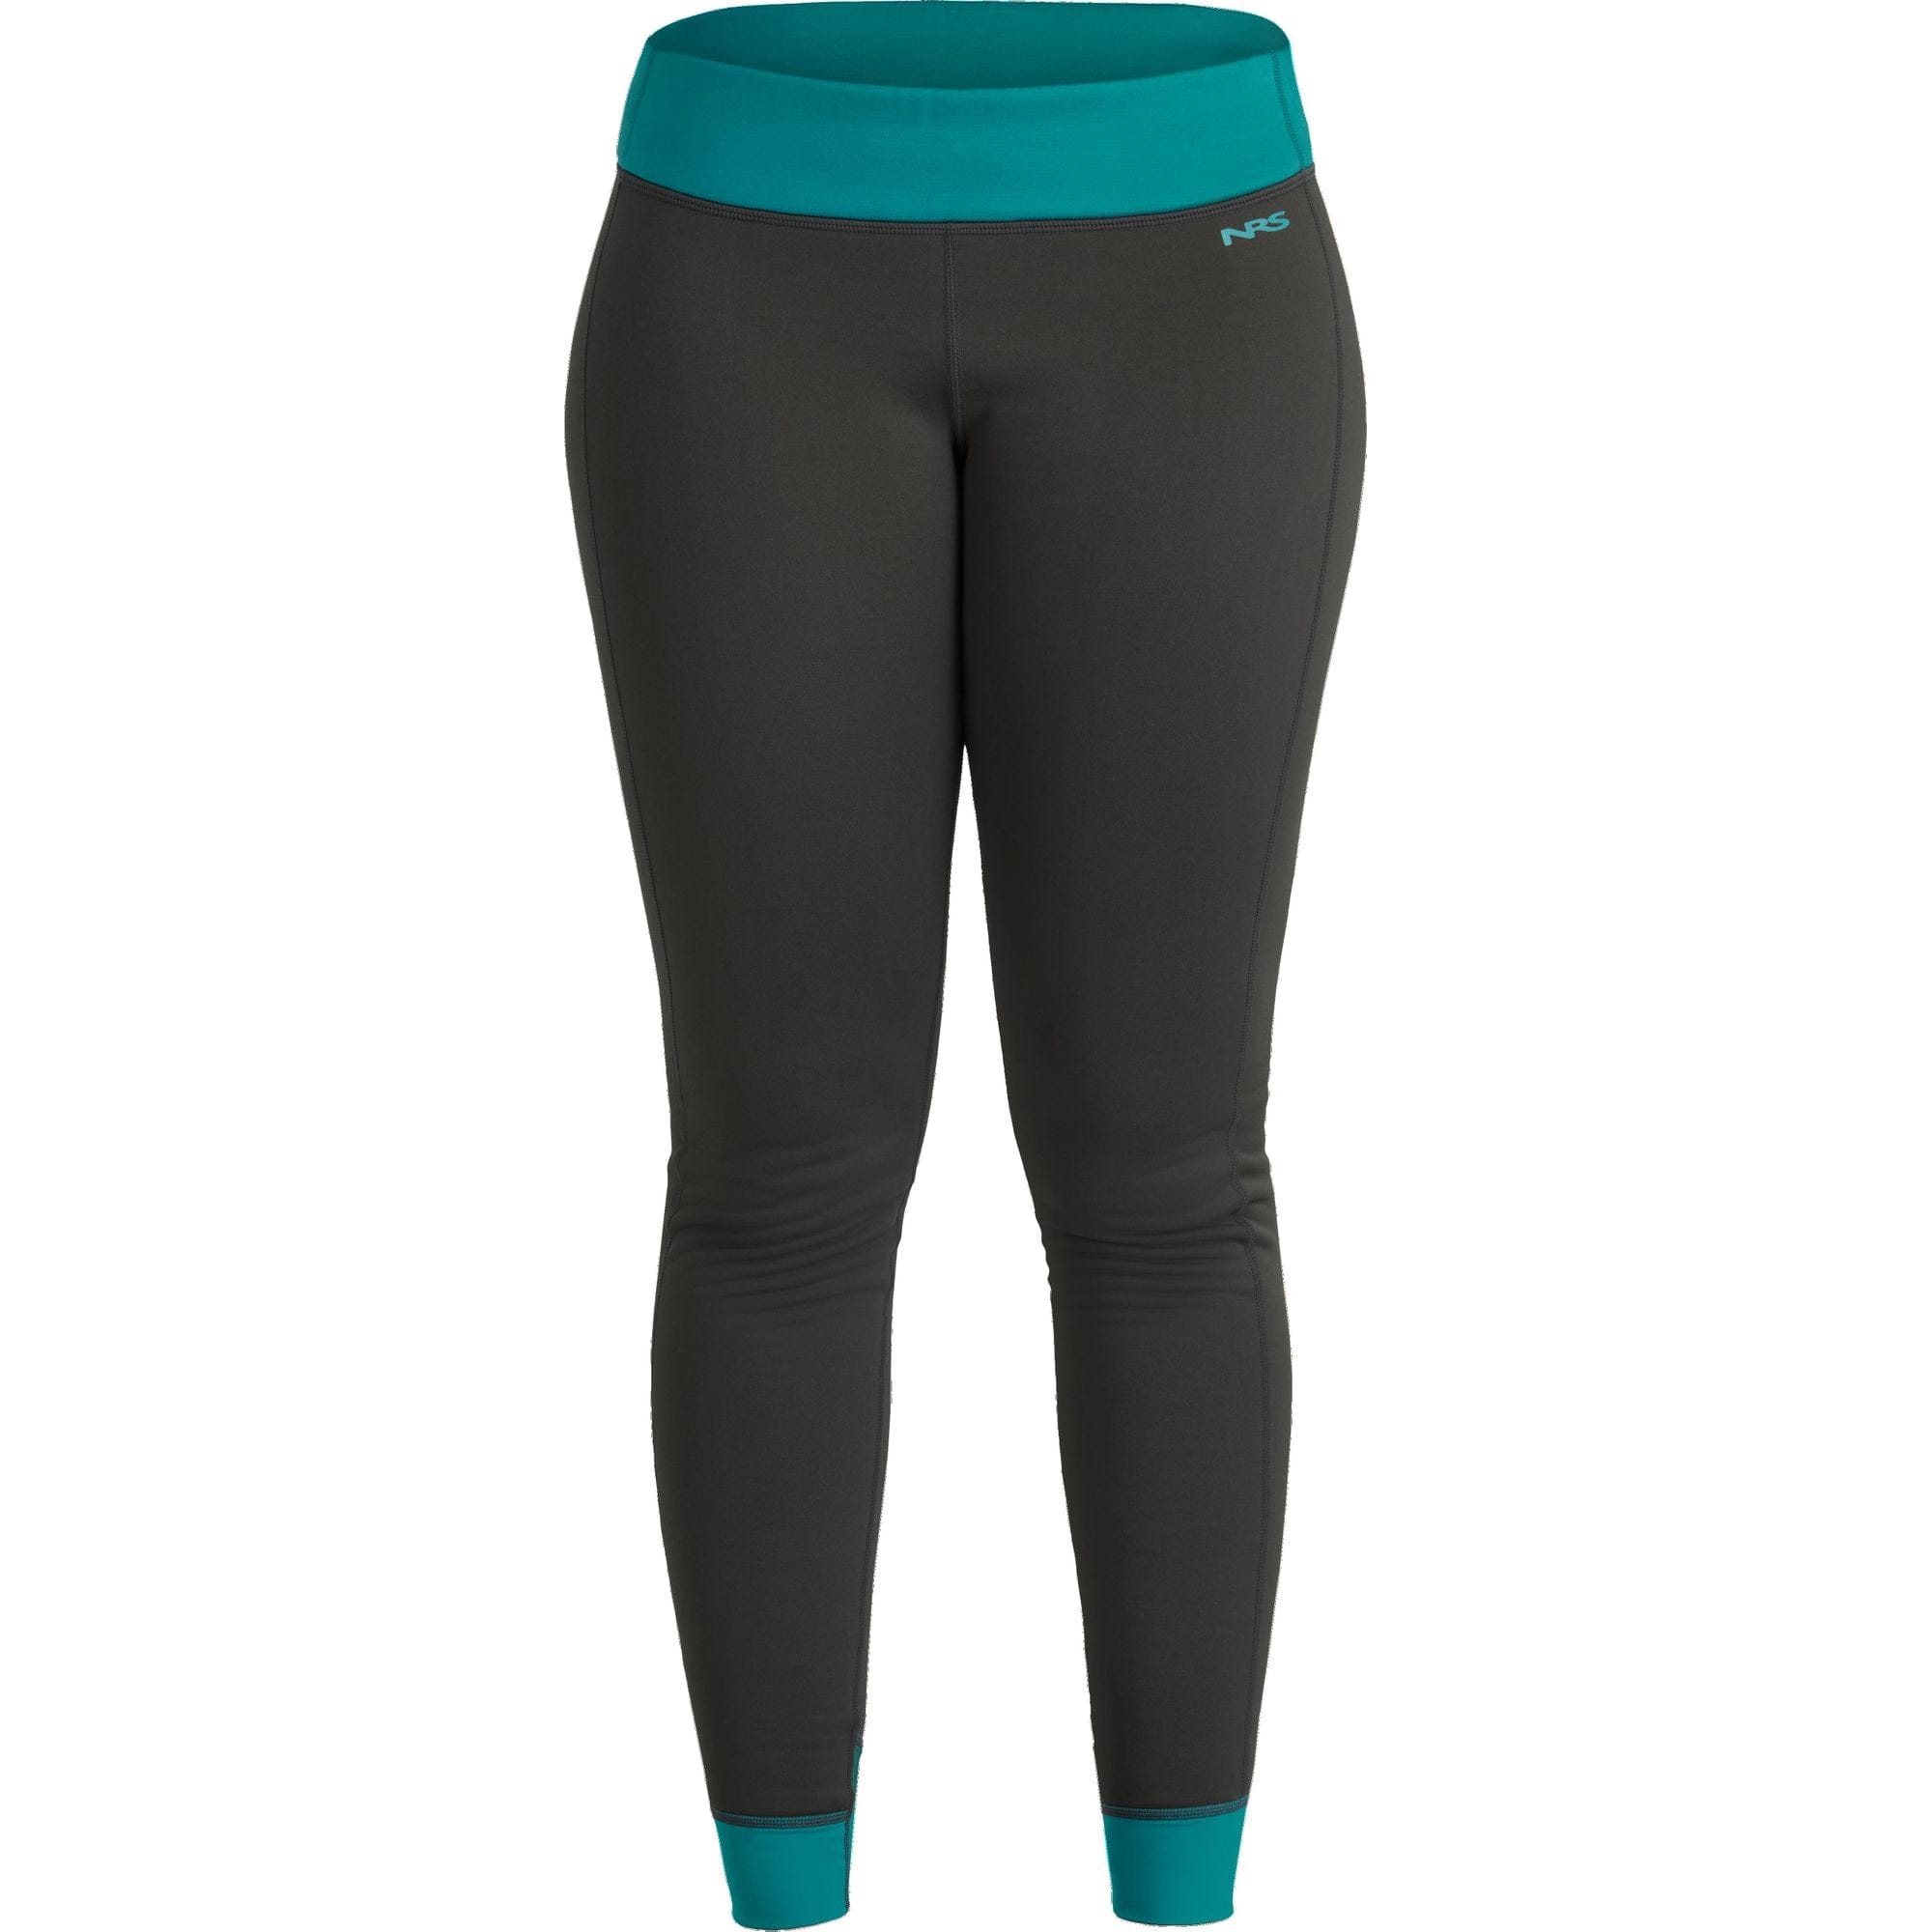 NRS Women's Expedition Weight Pants